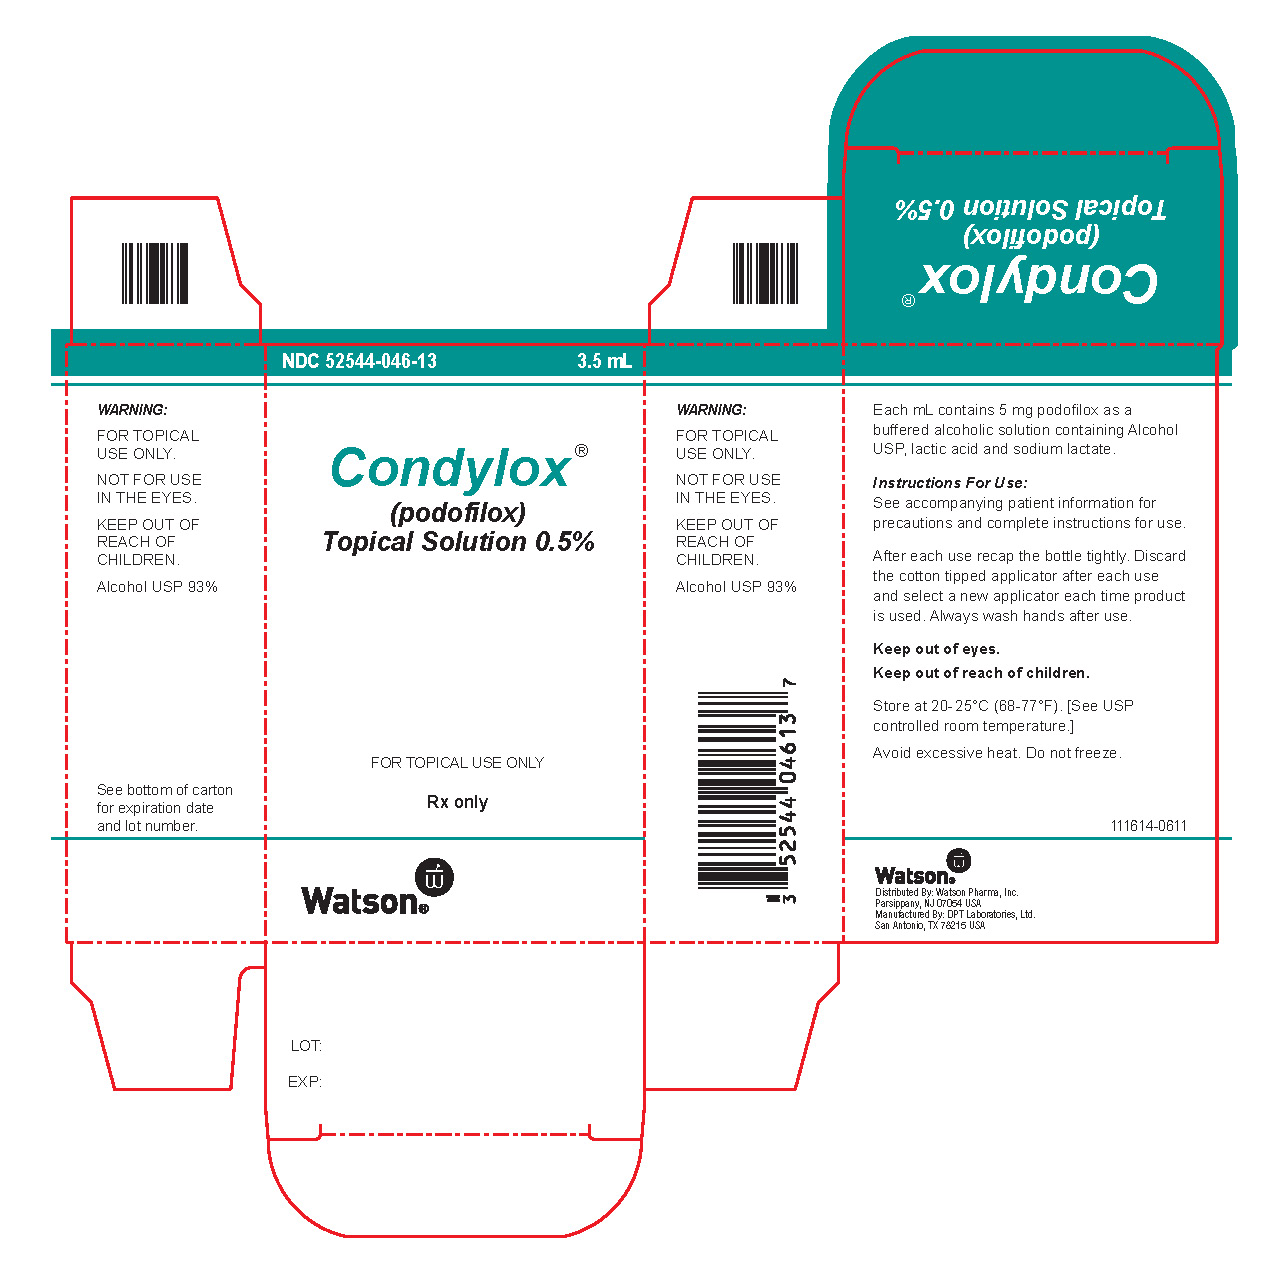 Condylox Topical Solution 0.5% 3.5 mL NDC 52544-046-13